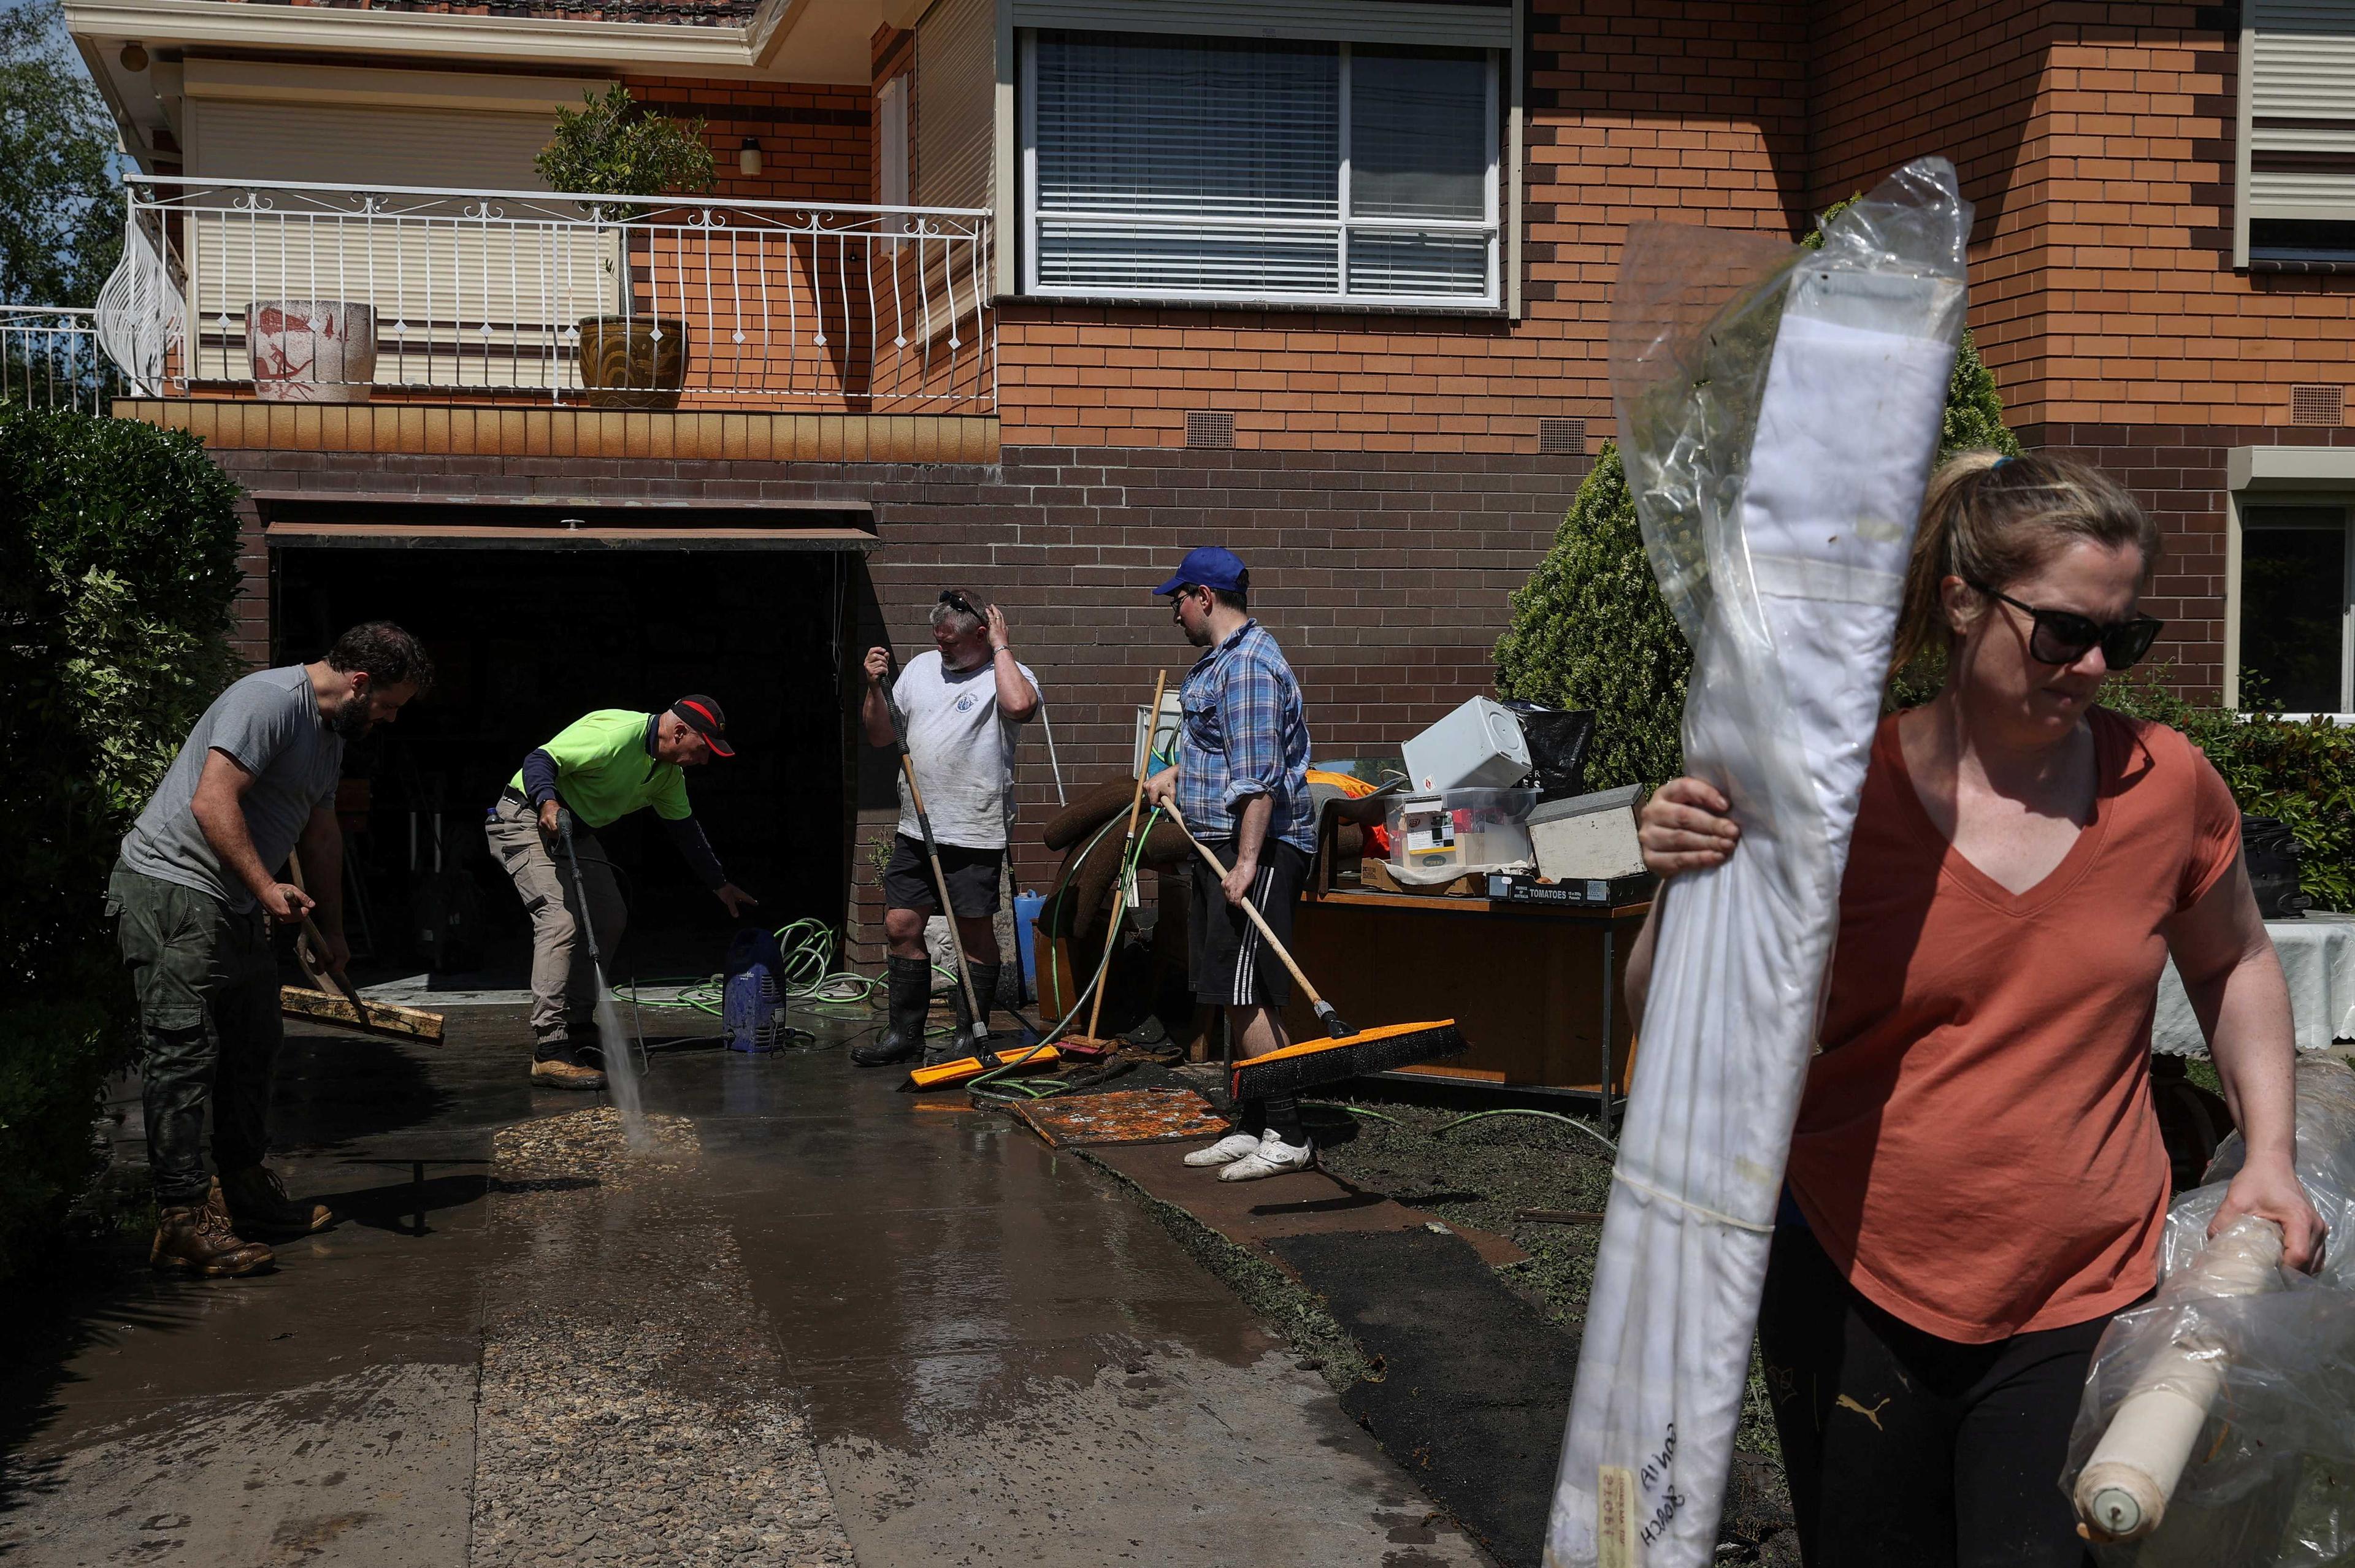 Volunteers assist local residents with cleanup efforts following severe flooding in the Maribyrnong suburb of Melbourne, Australia, Oct 17. Photo: Reuters